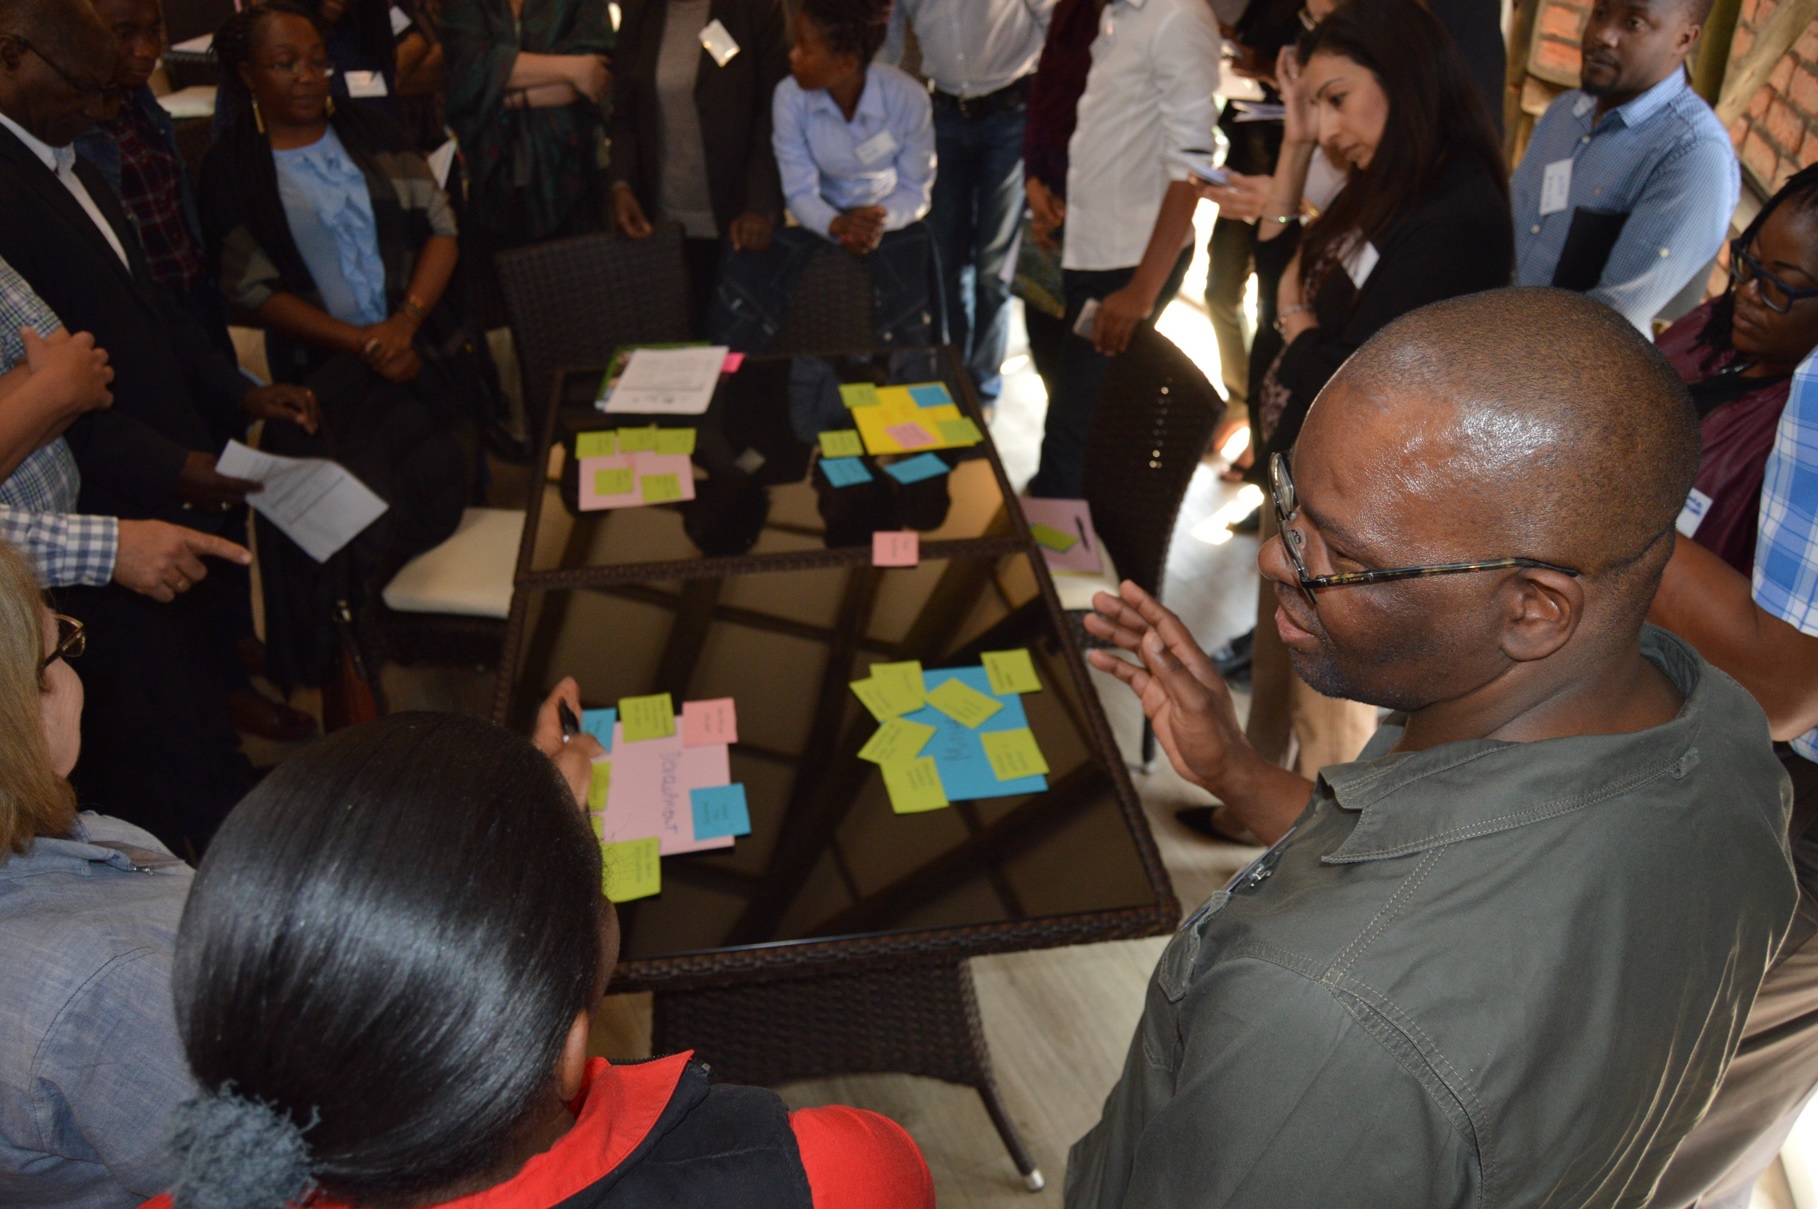 Windhoek city stakeholders participating in the co-exploring language activity.